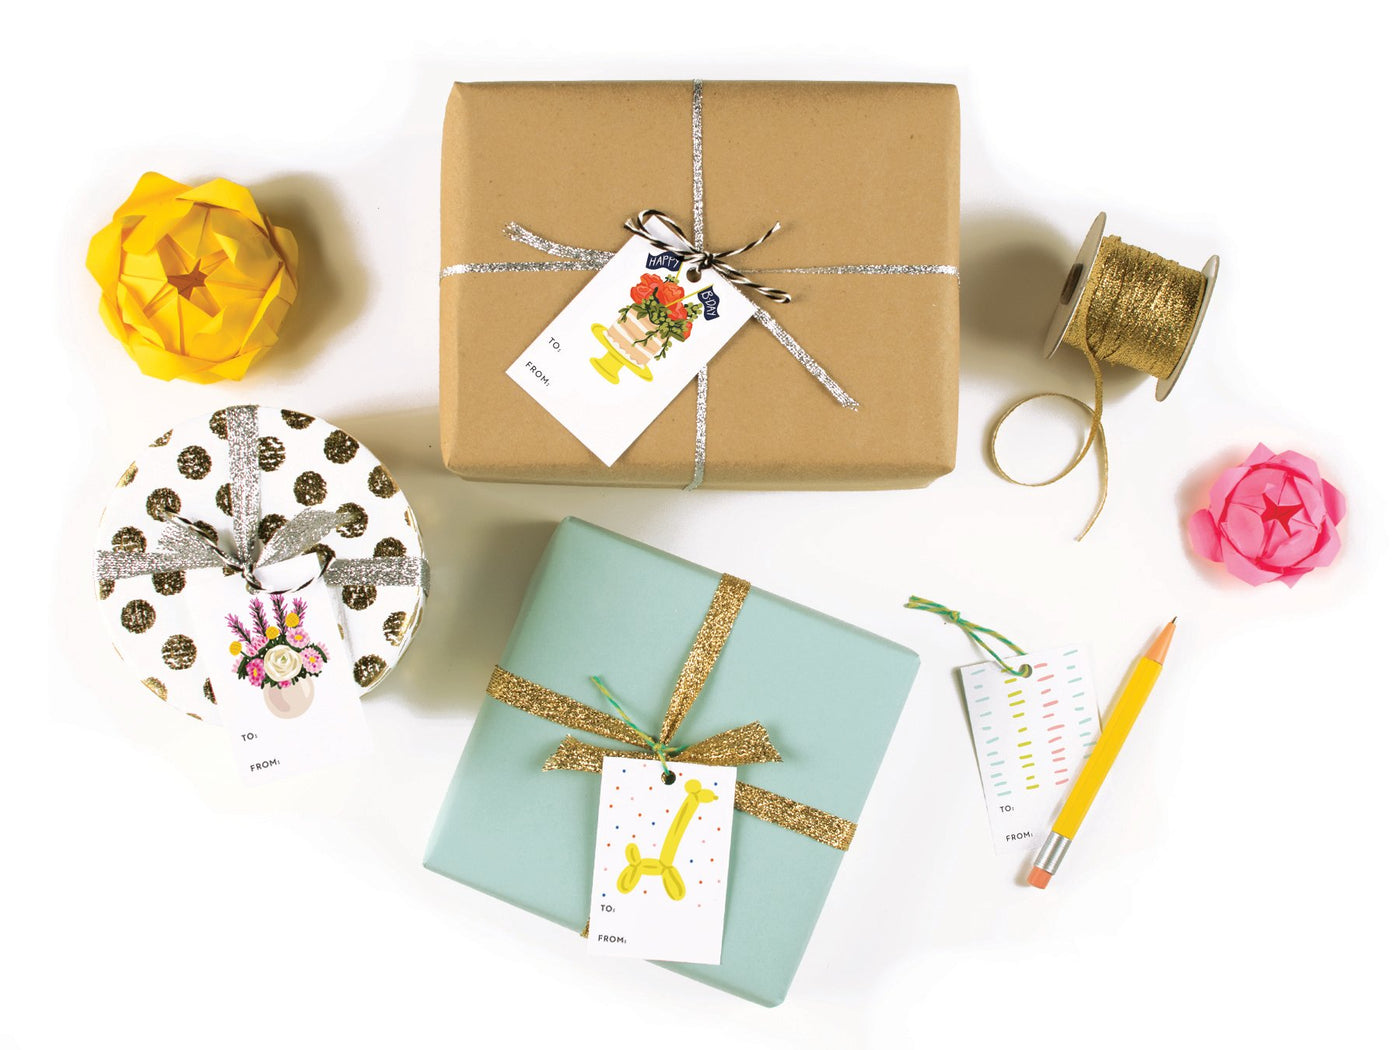 View of gift tags including a balloon giraffe gift tag attached to a gift using twine